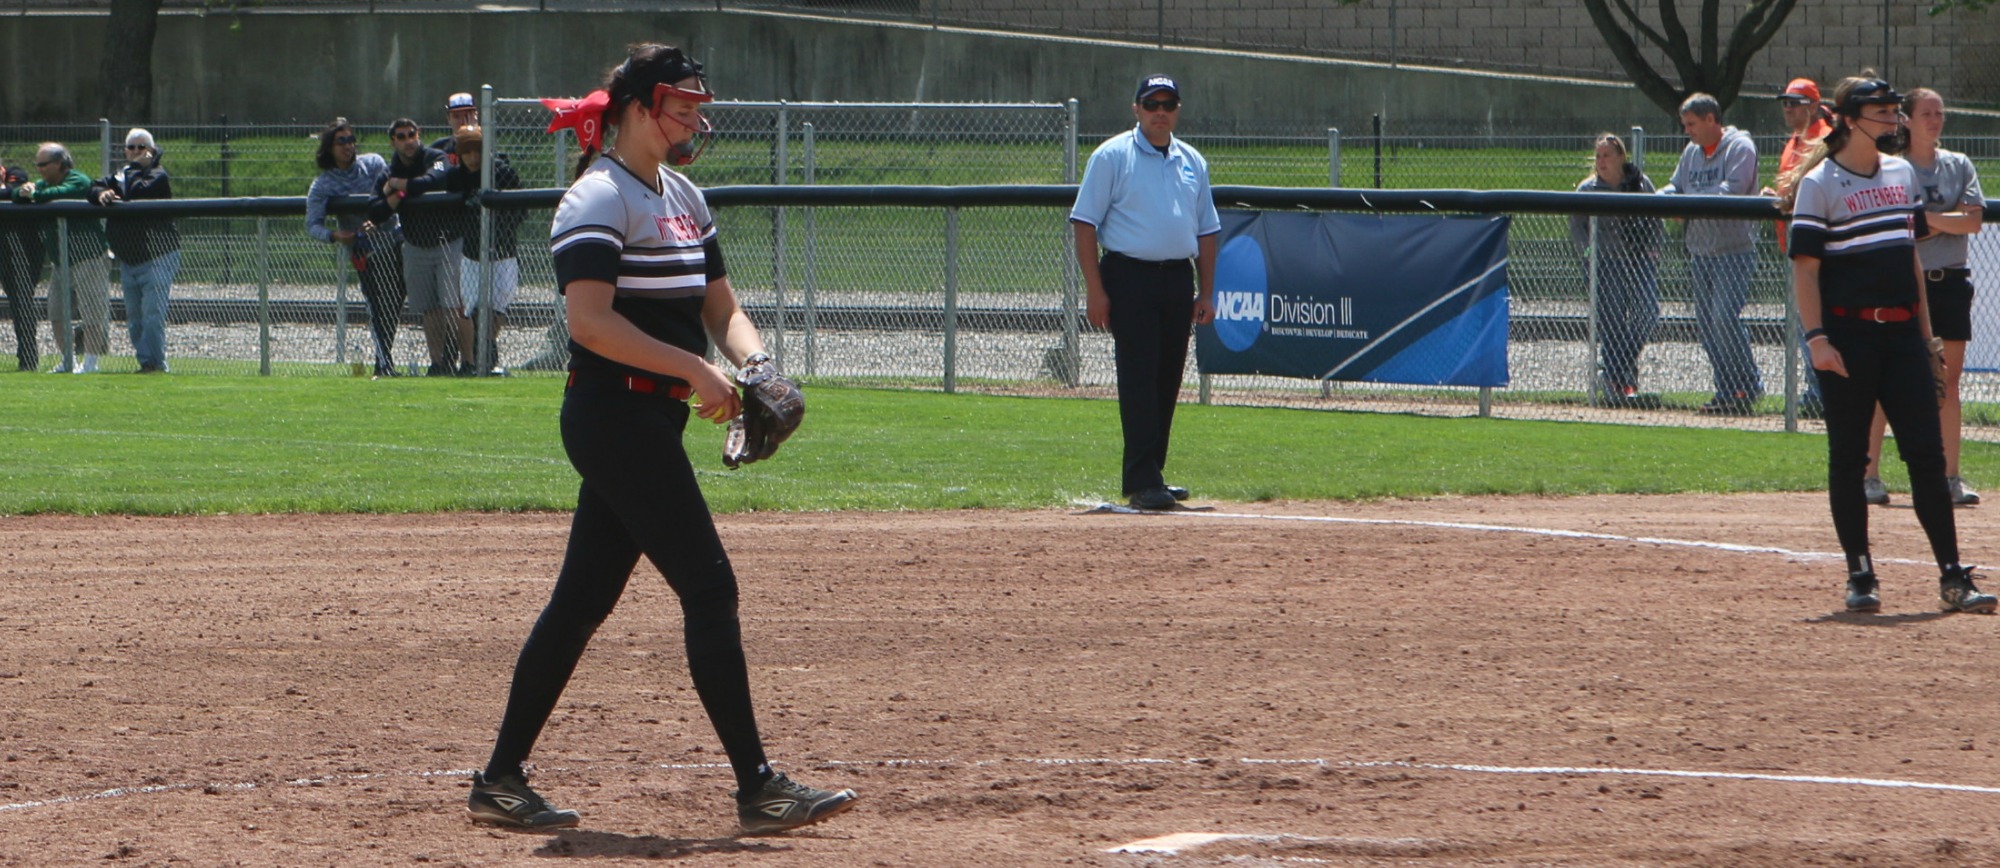 Tiger Softball Falls in Game One of NCAA Regionals, 4-2 to Heidelberg